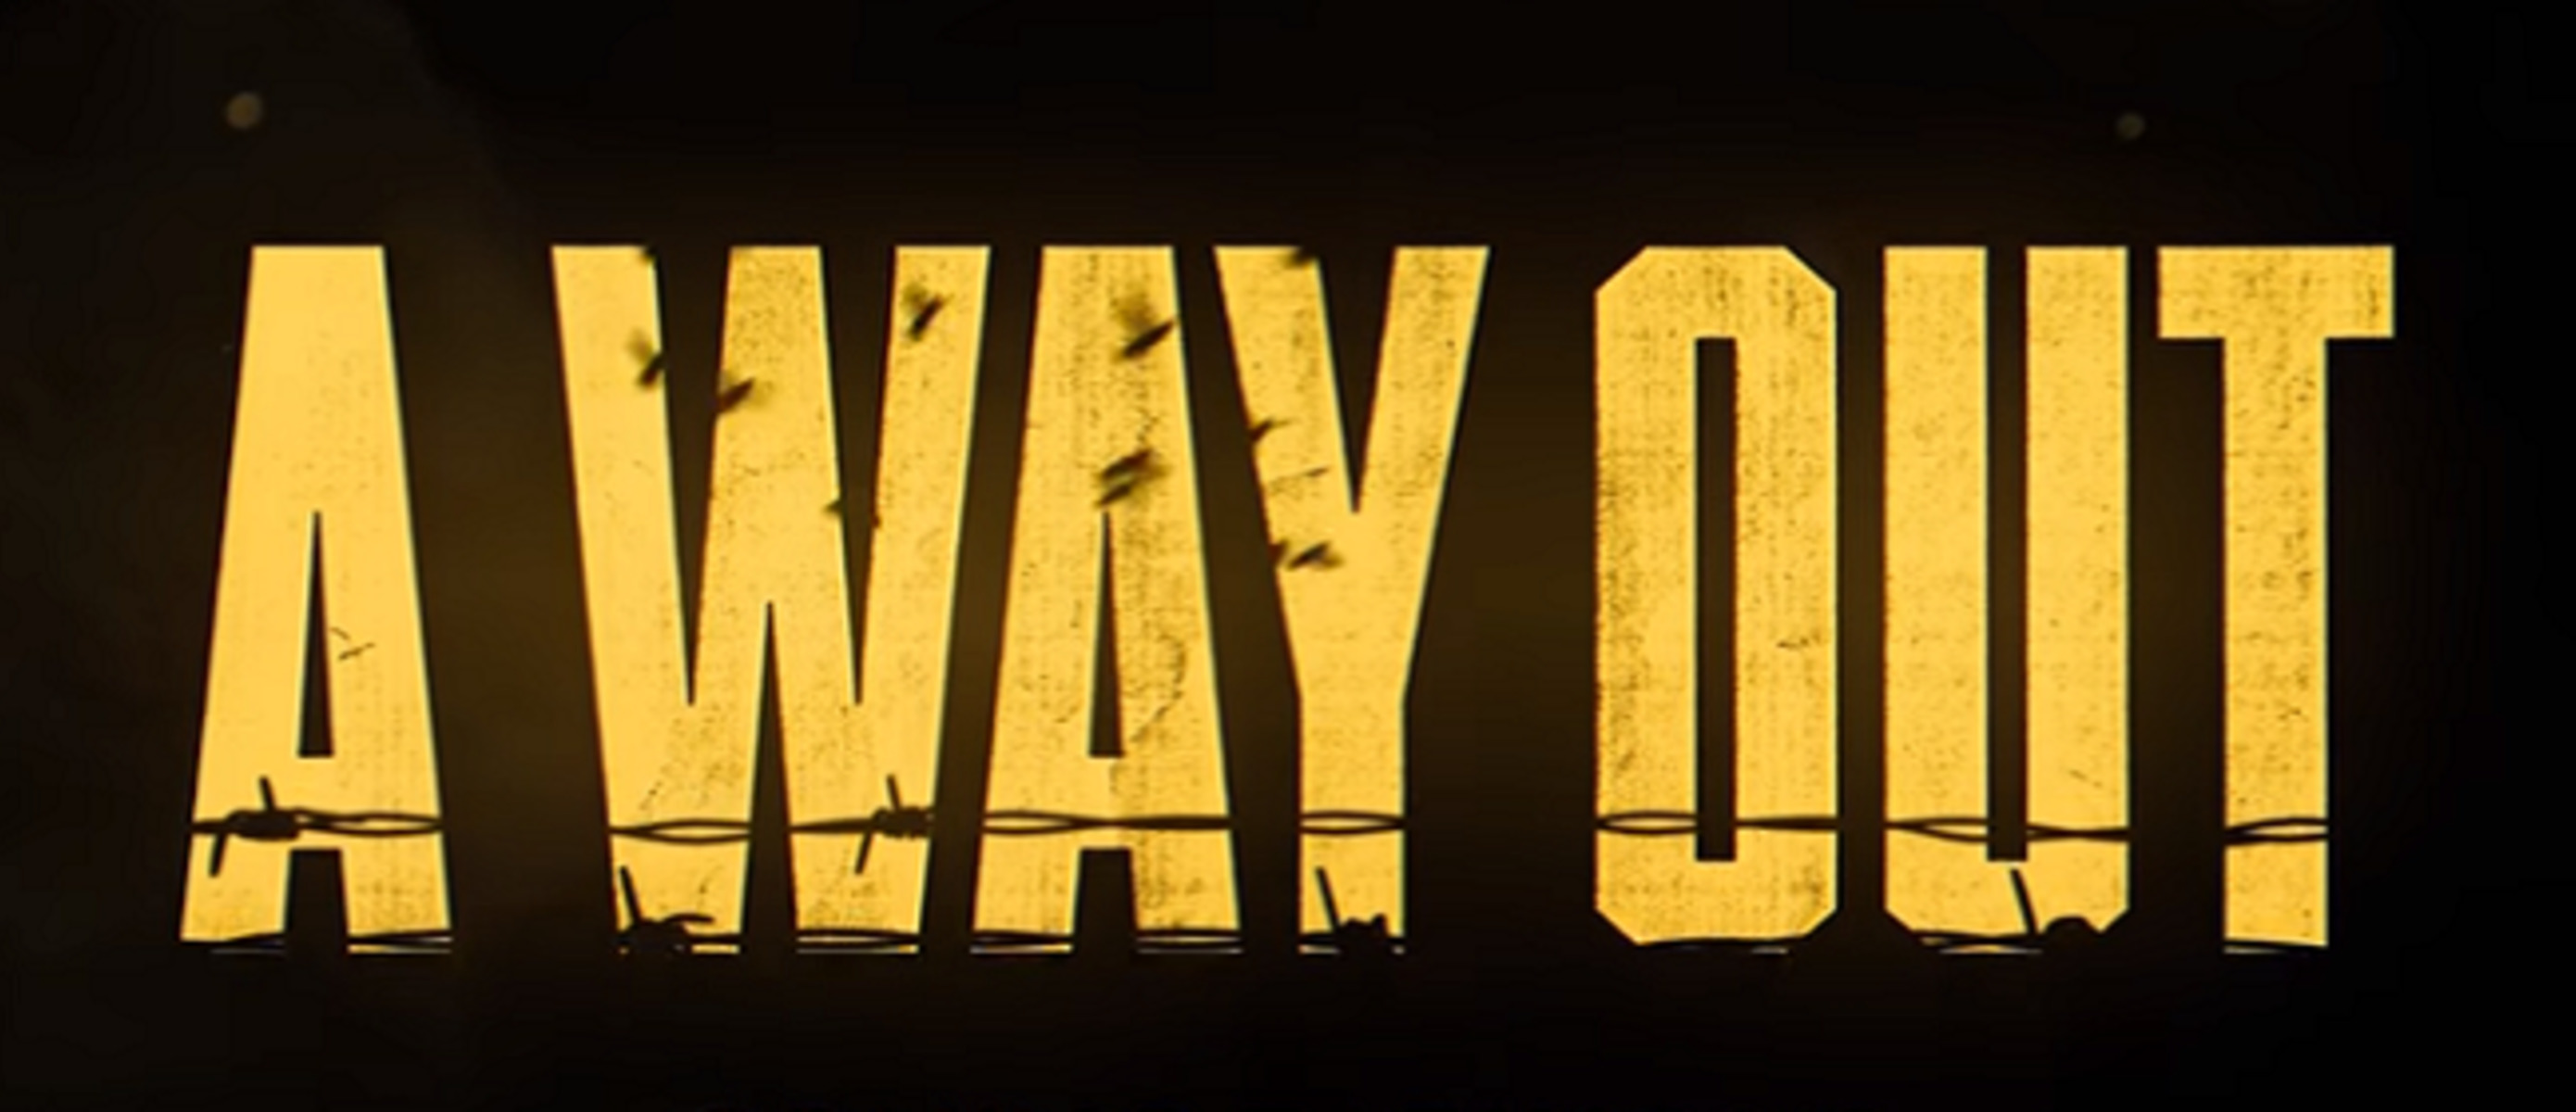 Coming out game. Way out игра. A way out логотип. A way out (2018). A way out фон.